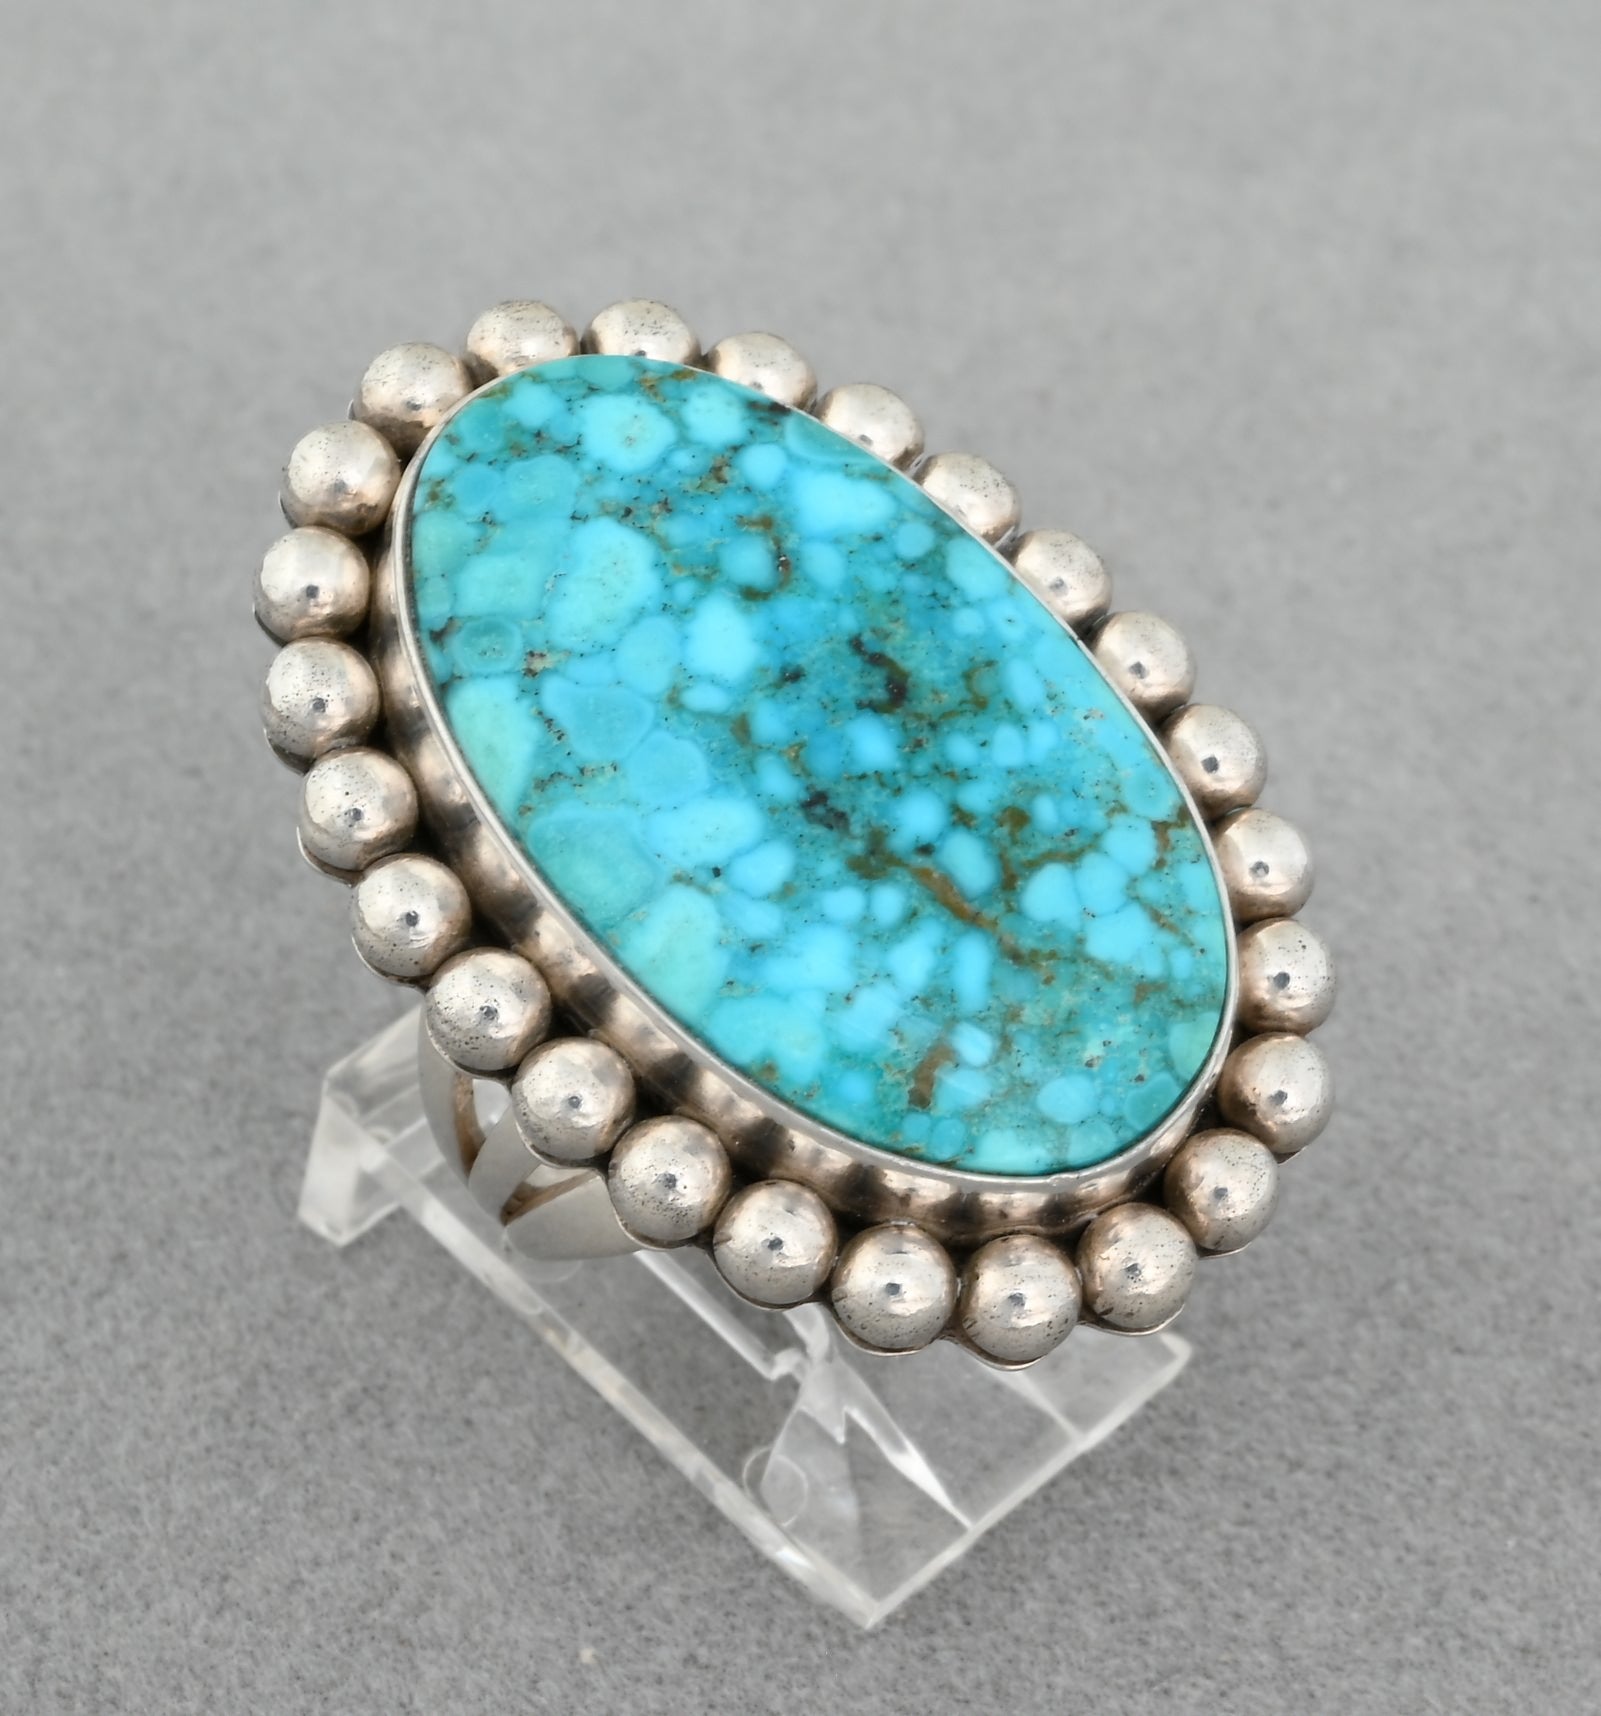 Ring with Kingman Waterweb Turquoise by Artie Yellowhorse